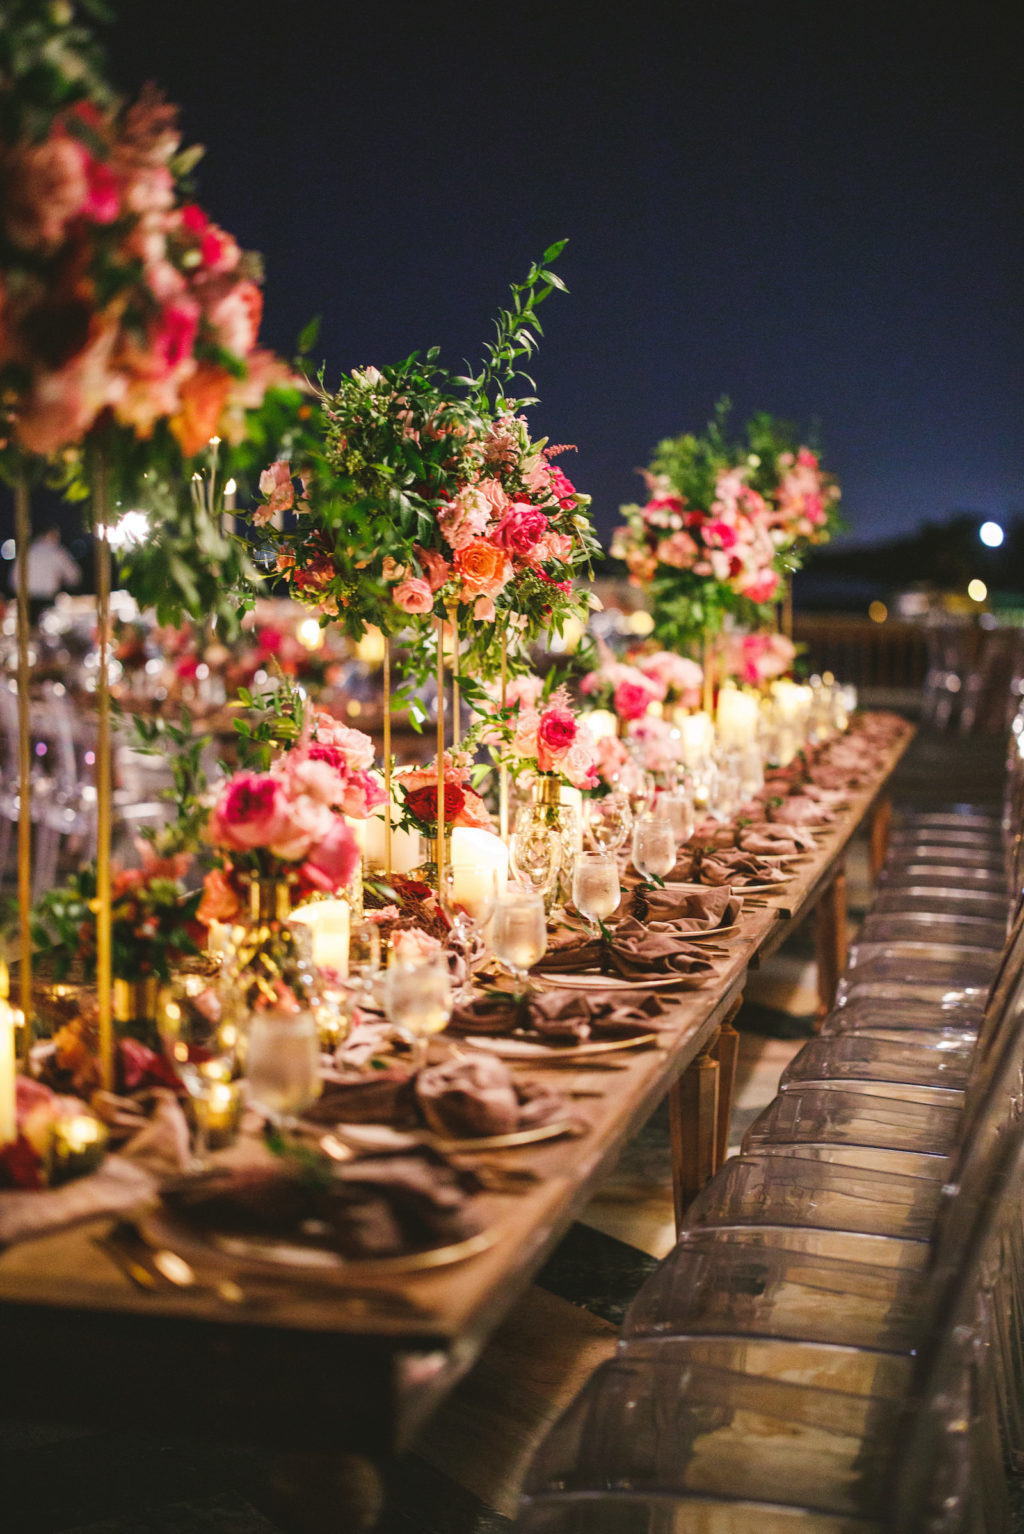 Luxury Elegant Tampa Wedding Reception with Long Feasting Tables featuring Colorful Blush Pink, Fuchsia and Orange Rose Centerpieces with Greenery and Candles and Clear Ghost Chairs